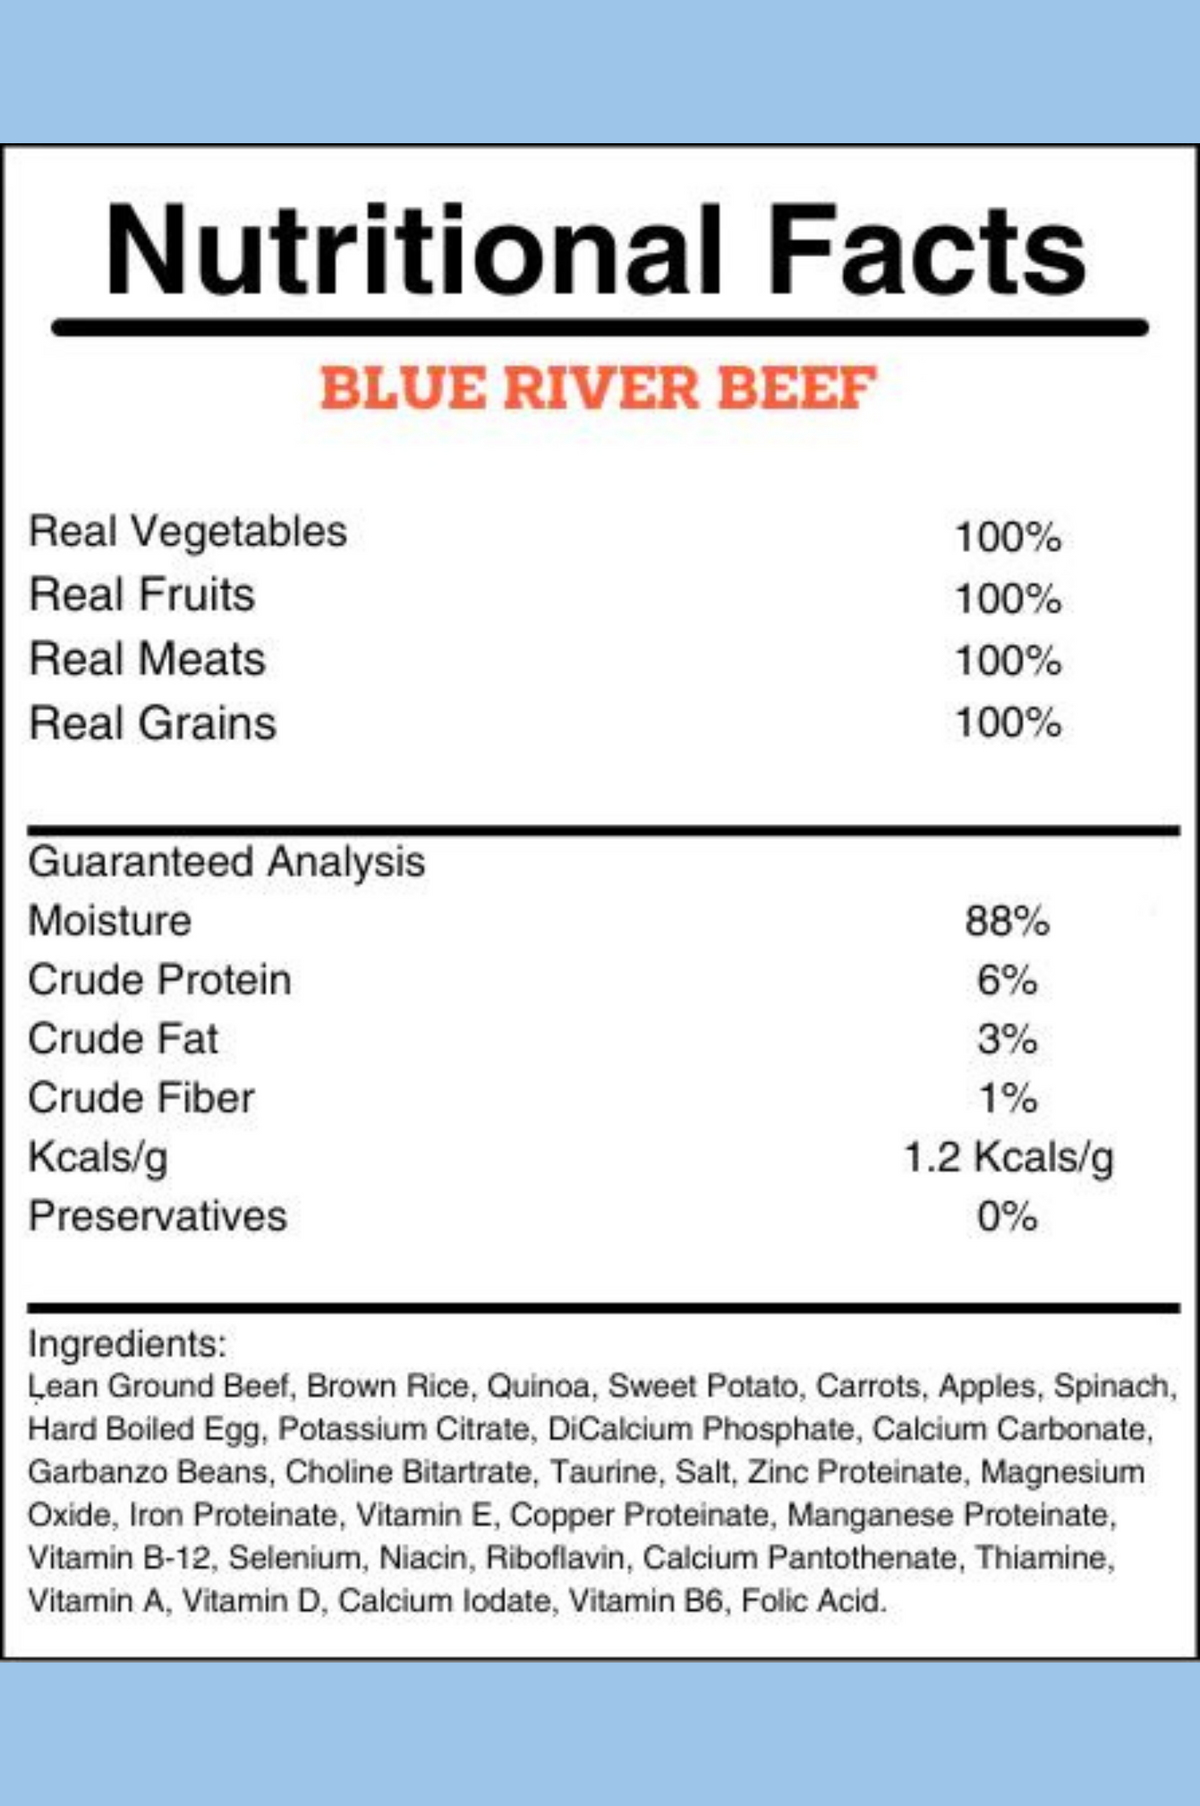 Blue River Beef